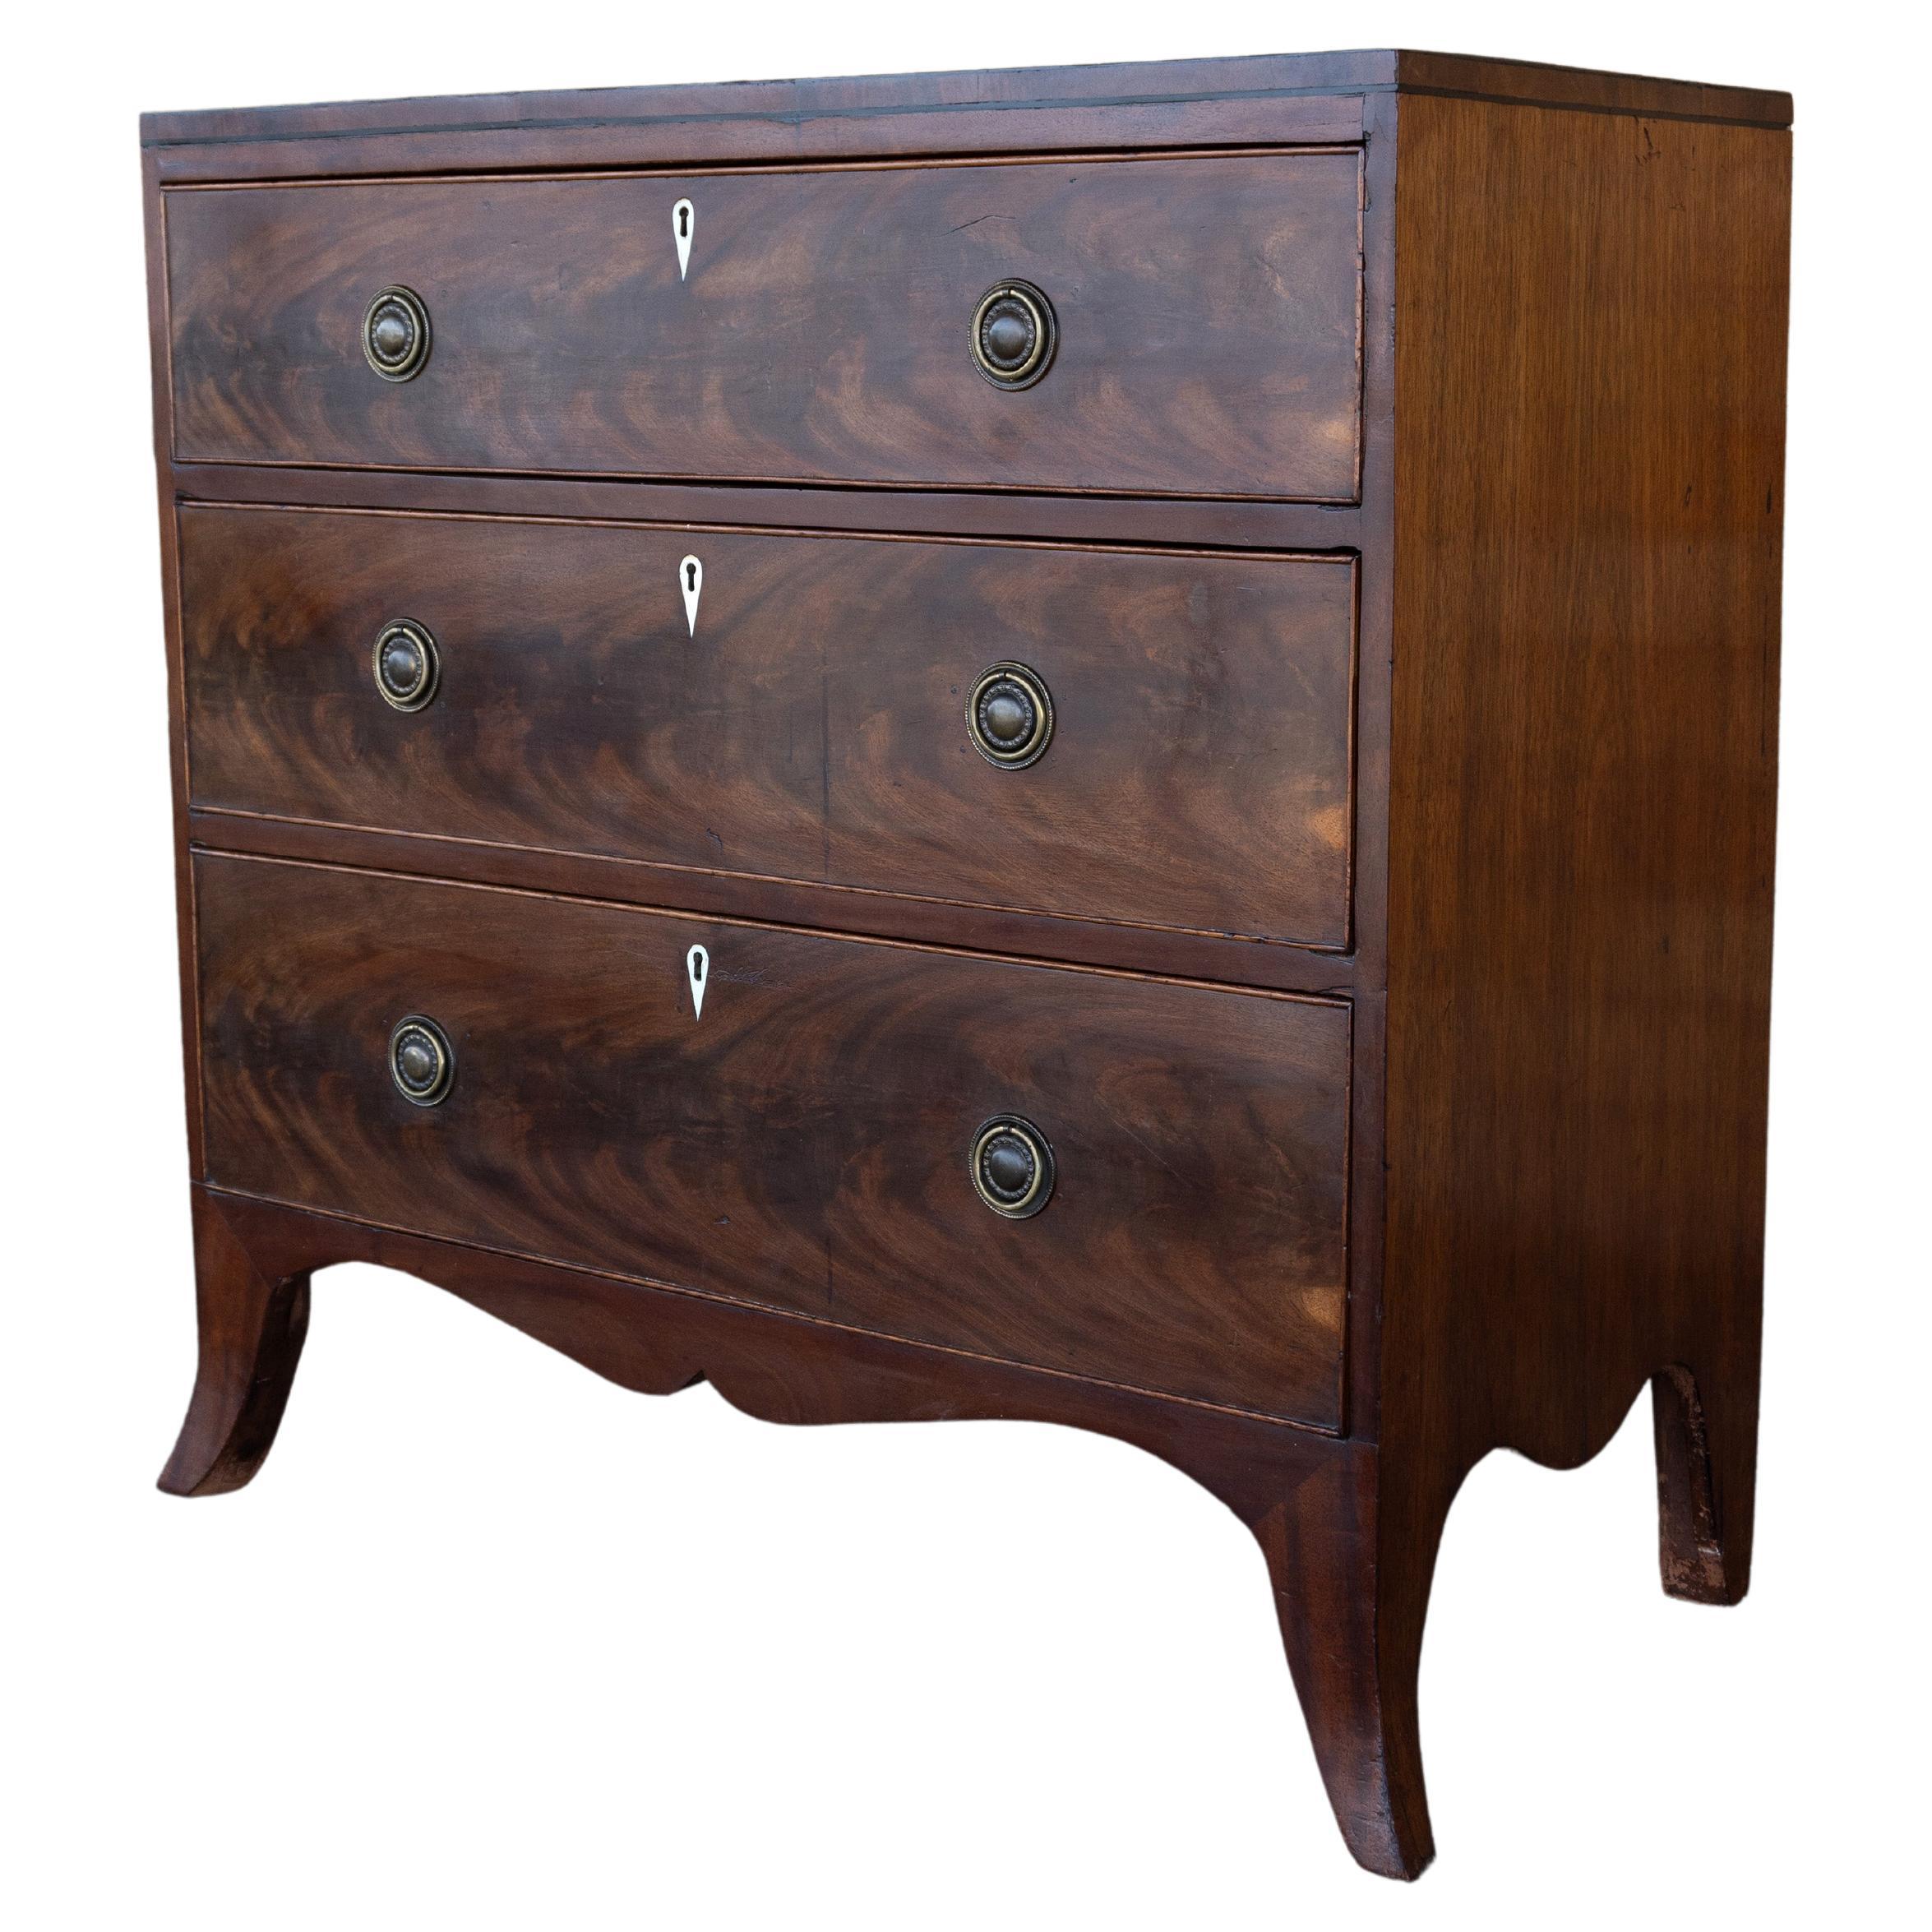 Antique English 19th Century Regency Diminutive Chest Of Drawers C.1810 For Sale